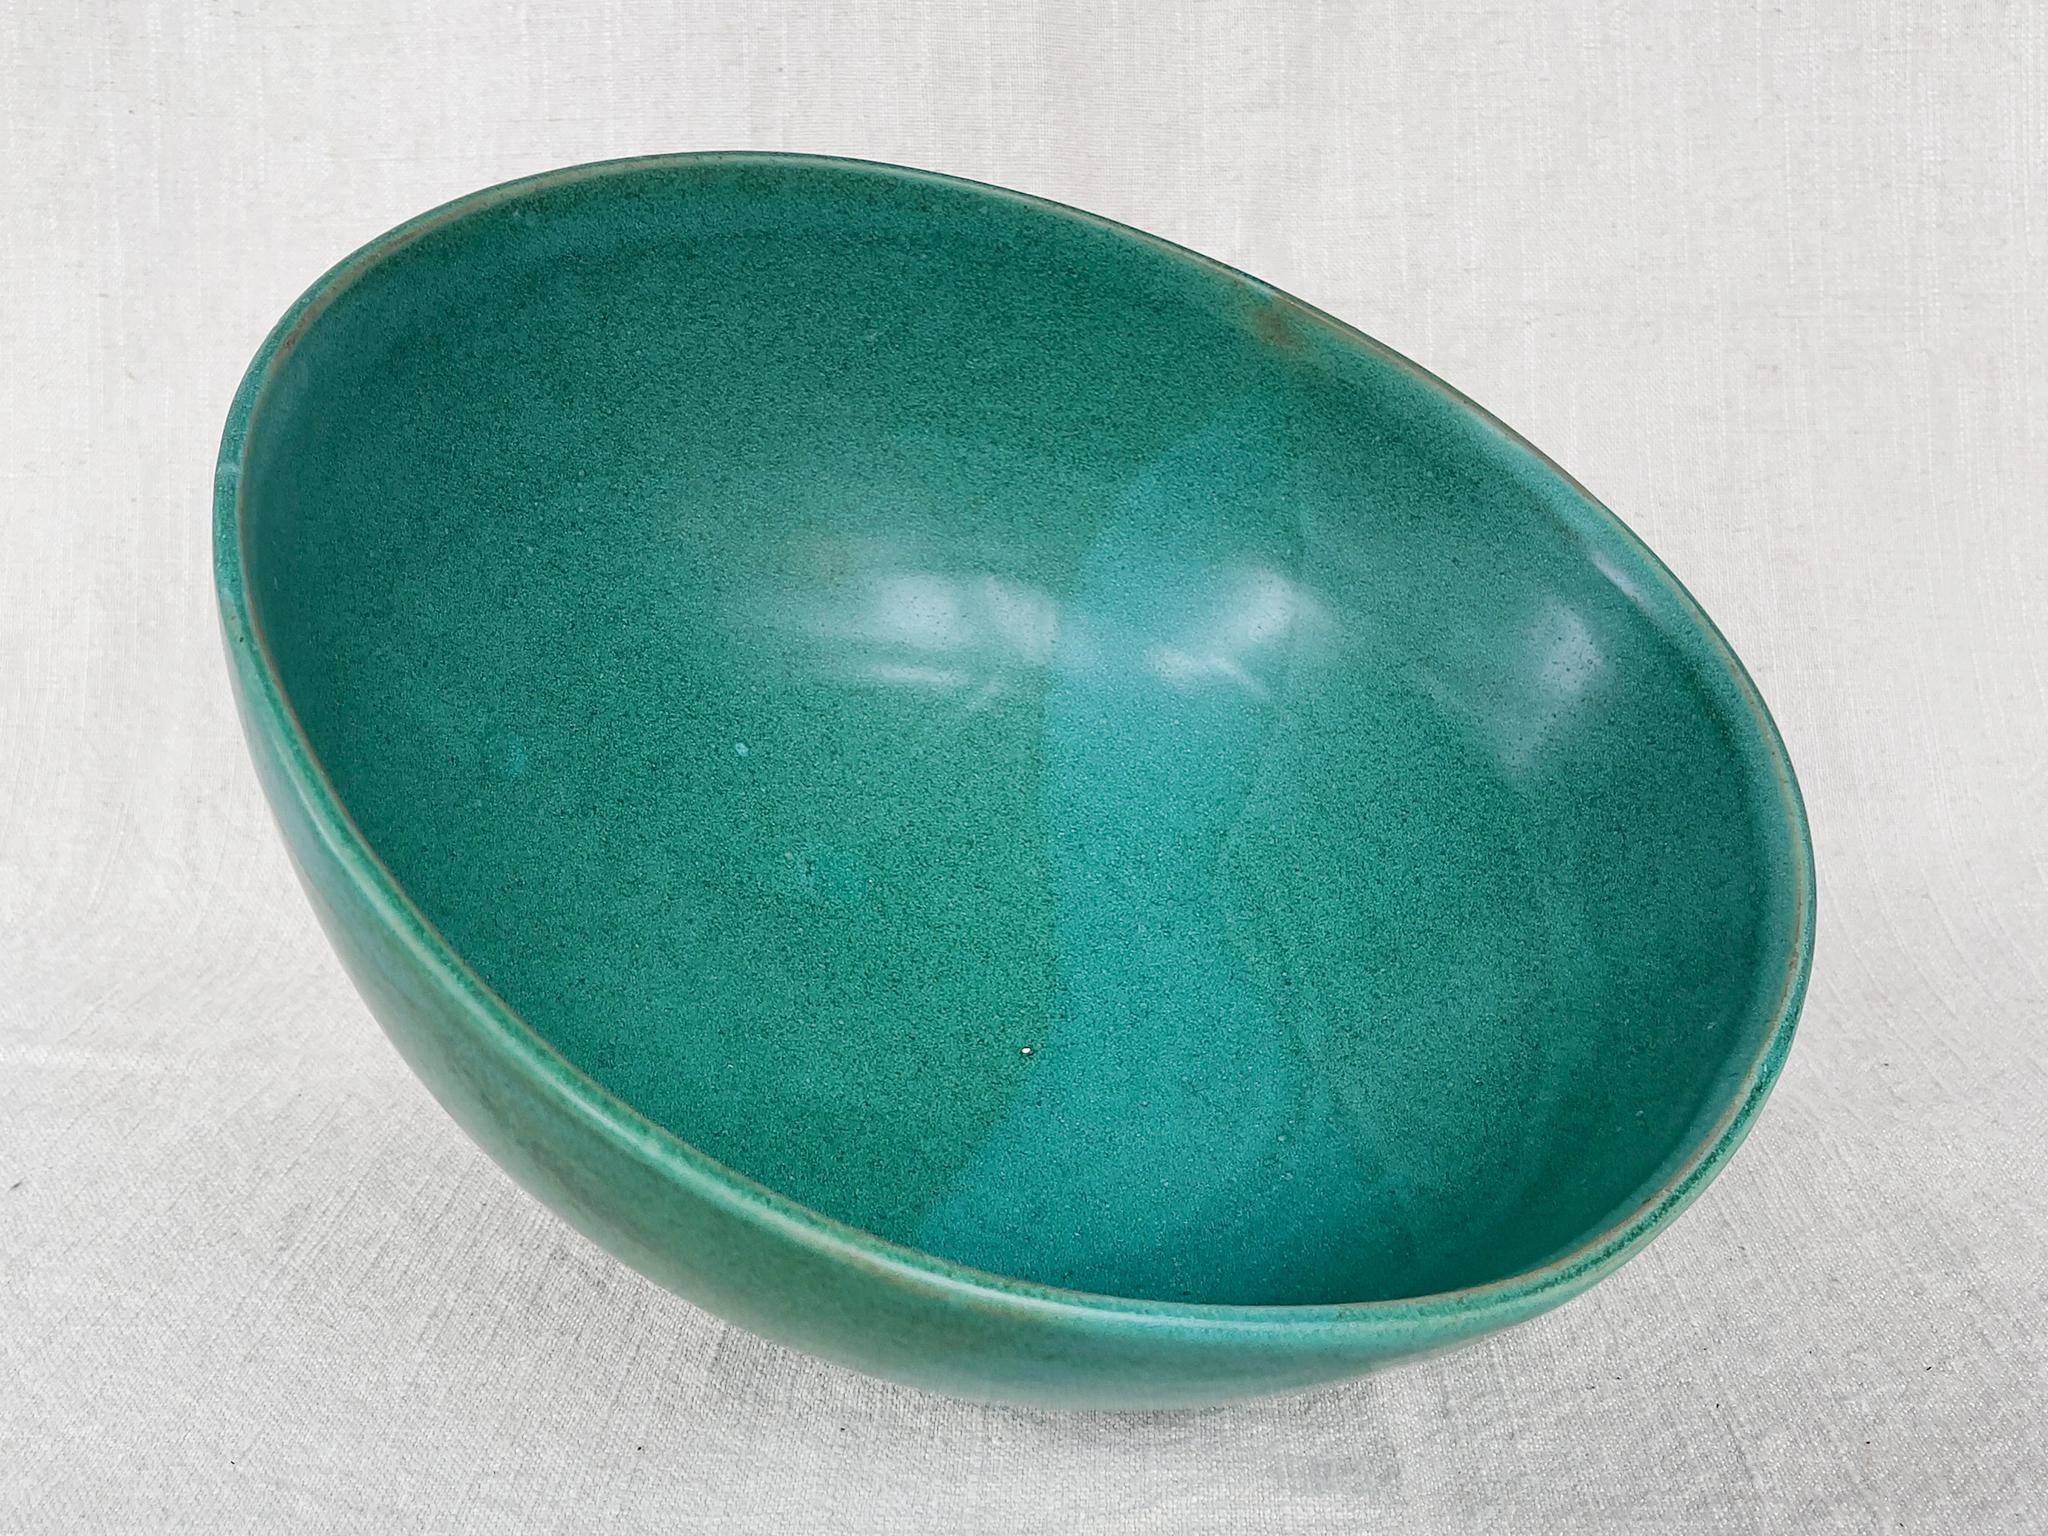 From Thom Lussier's oxidized copper collection - a series of ceramic vessels that stand out for their brilliant palette and rich textures. This bowl is safe for food.

White stoneware with cone 6 glaze.

Dimensions:
11.25 in. width
11.4 in.